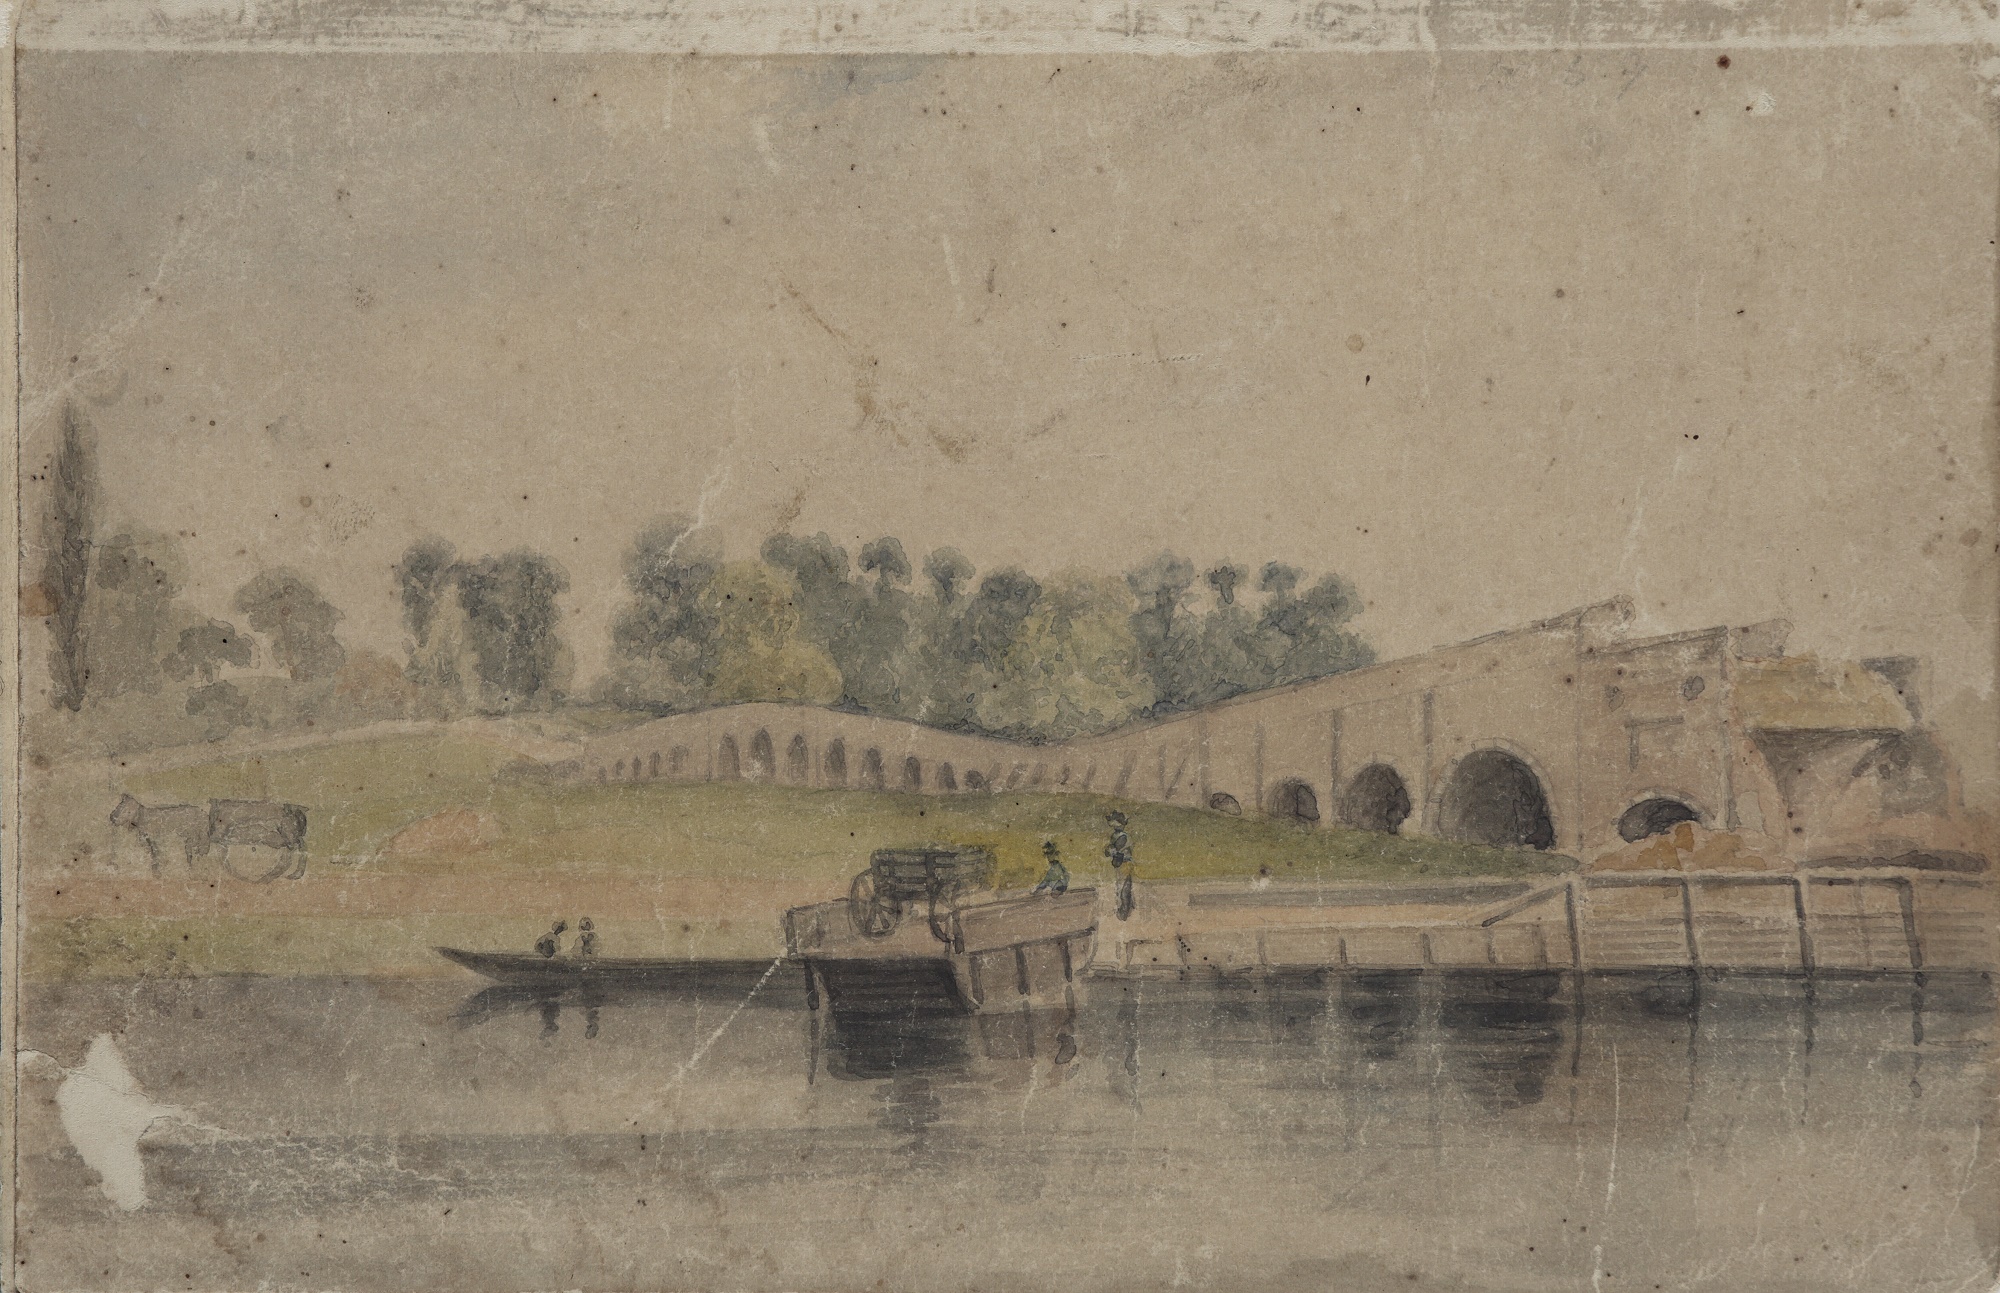 Watercolour of Walton Bridge, 1859. The central arches have been destroyed by a storm.